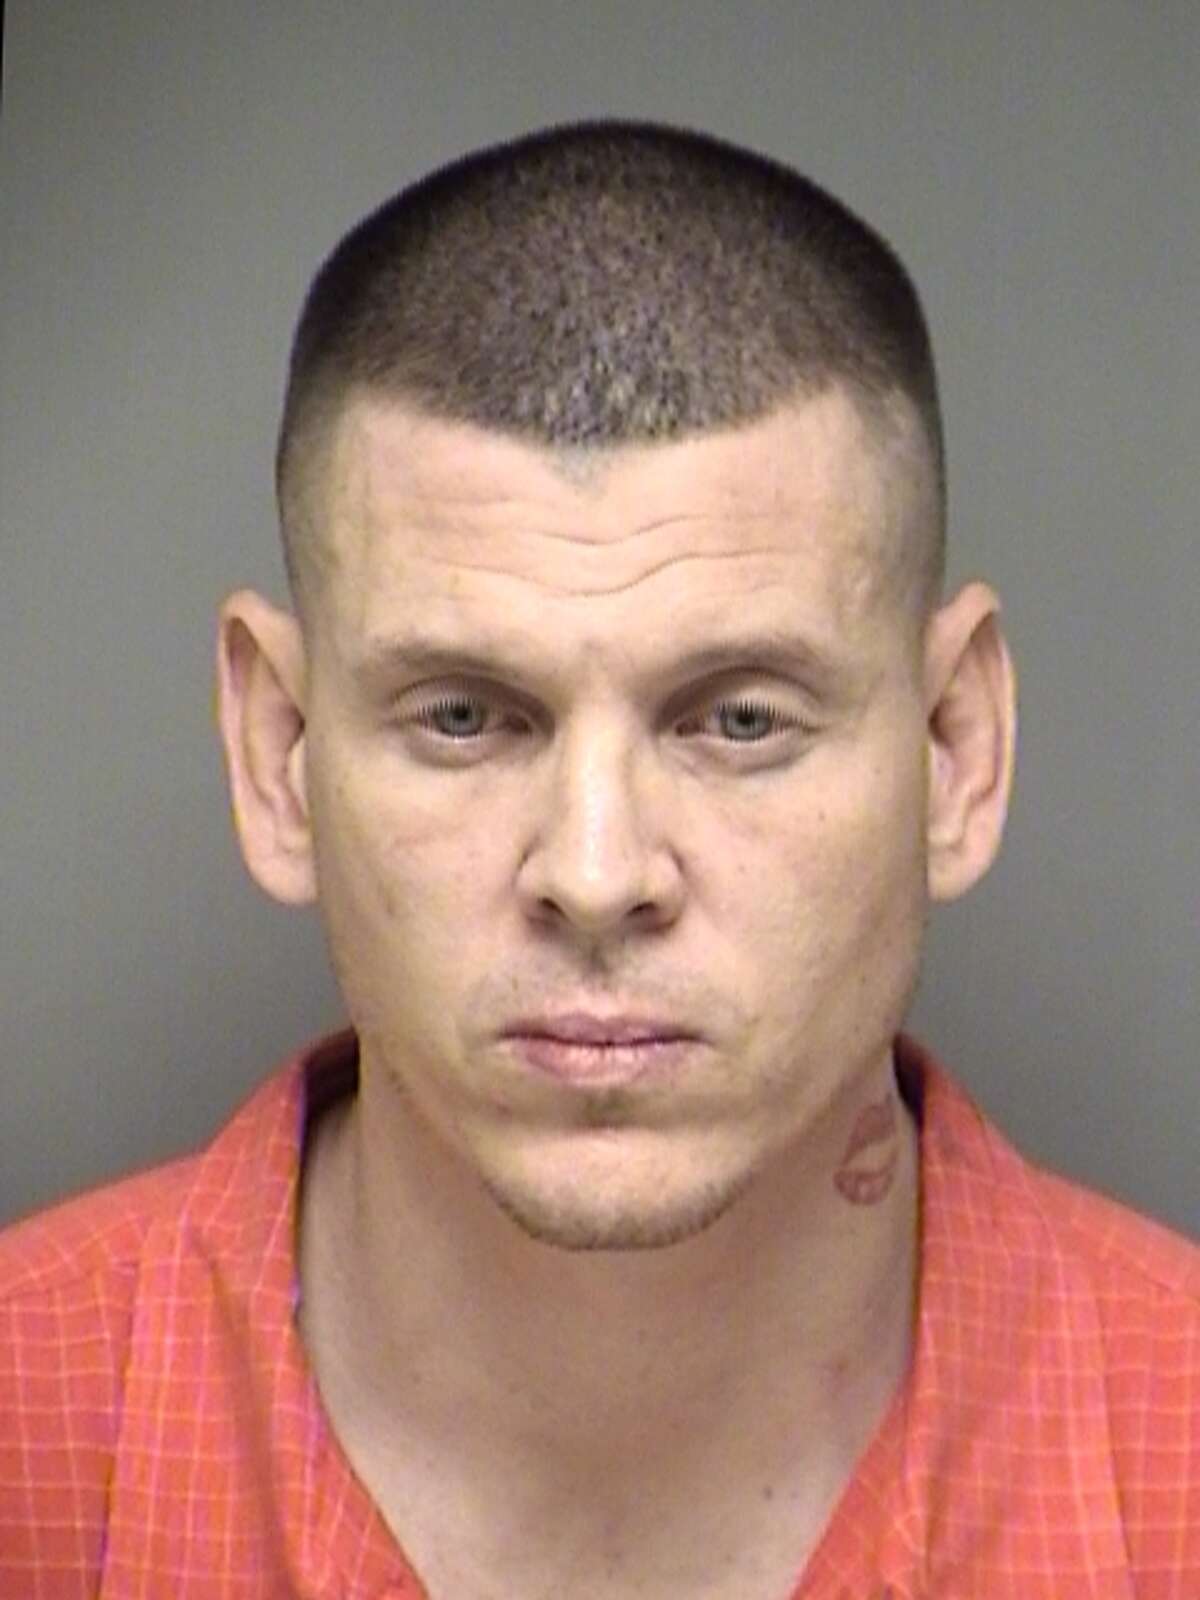 Michael Crawford was arrested in Denton County on May 19, 2011 for a bench warrant.